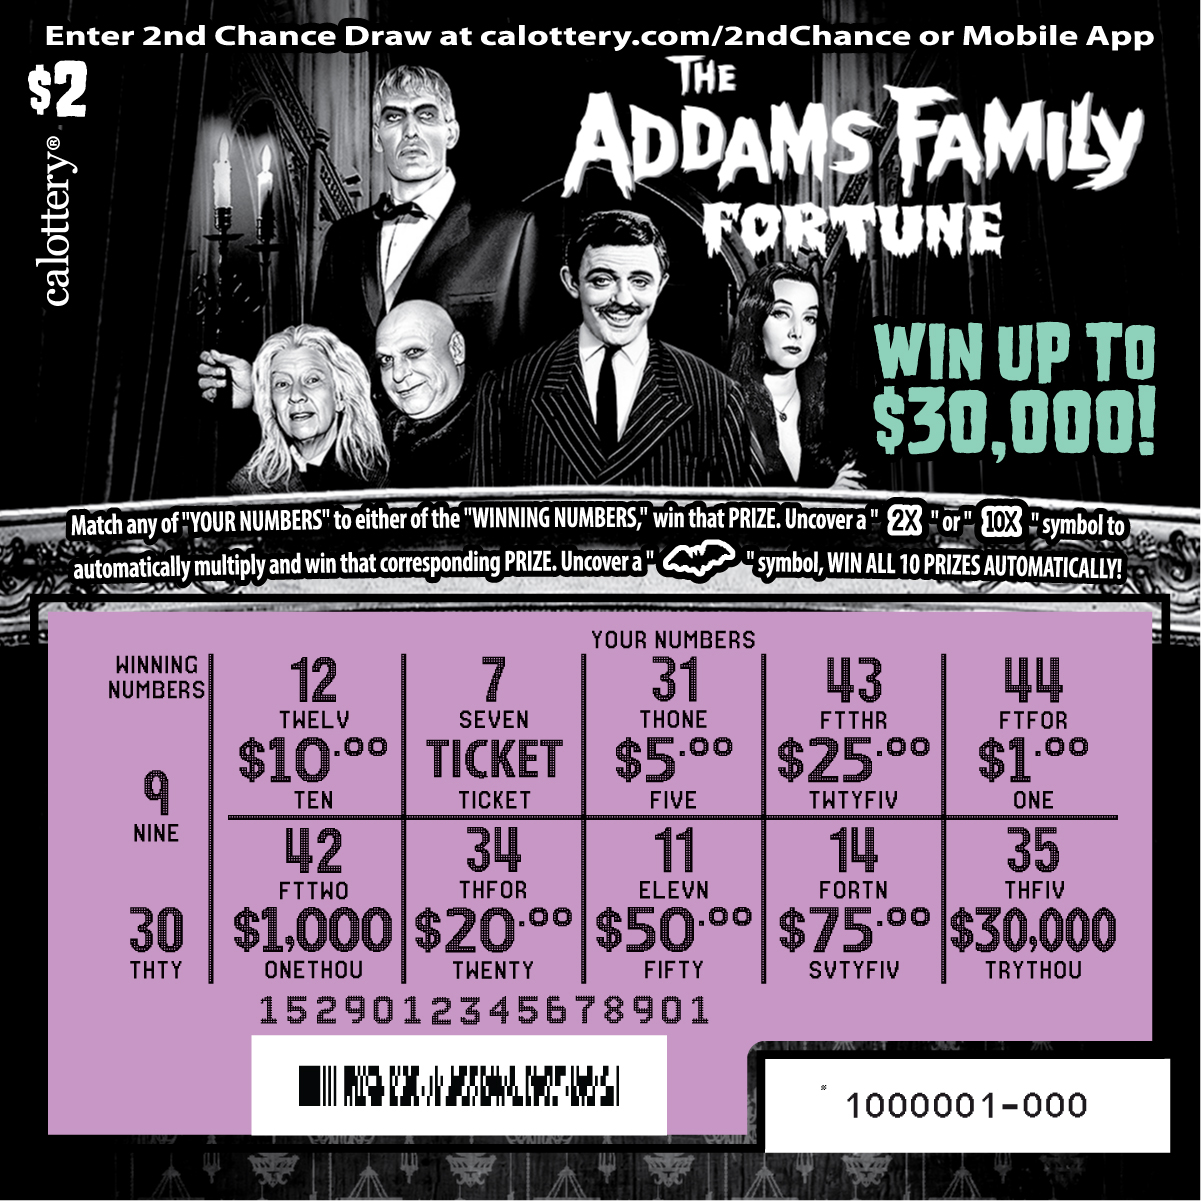 1529 $2 Aggams Family Fortune